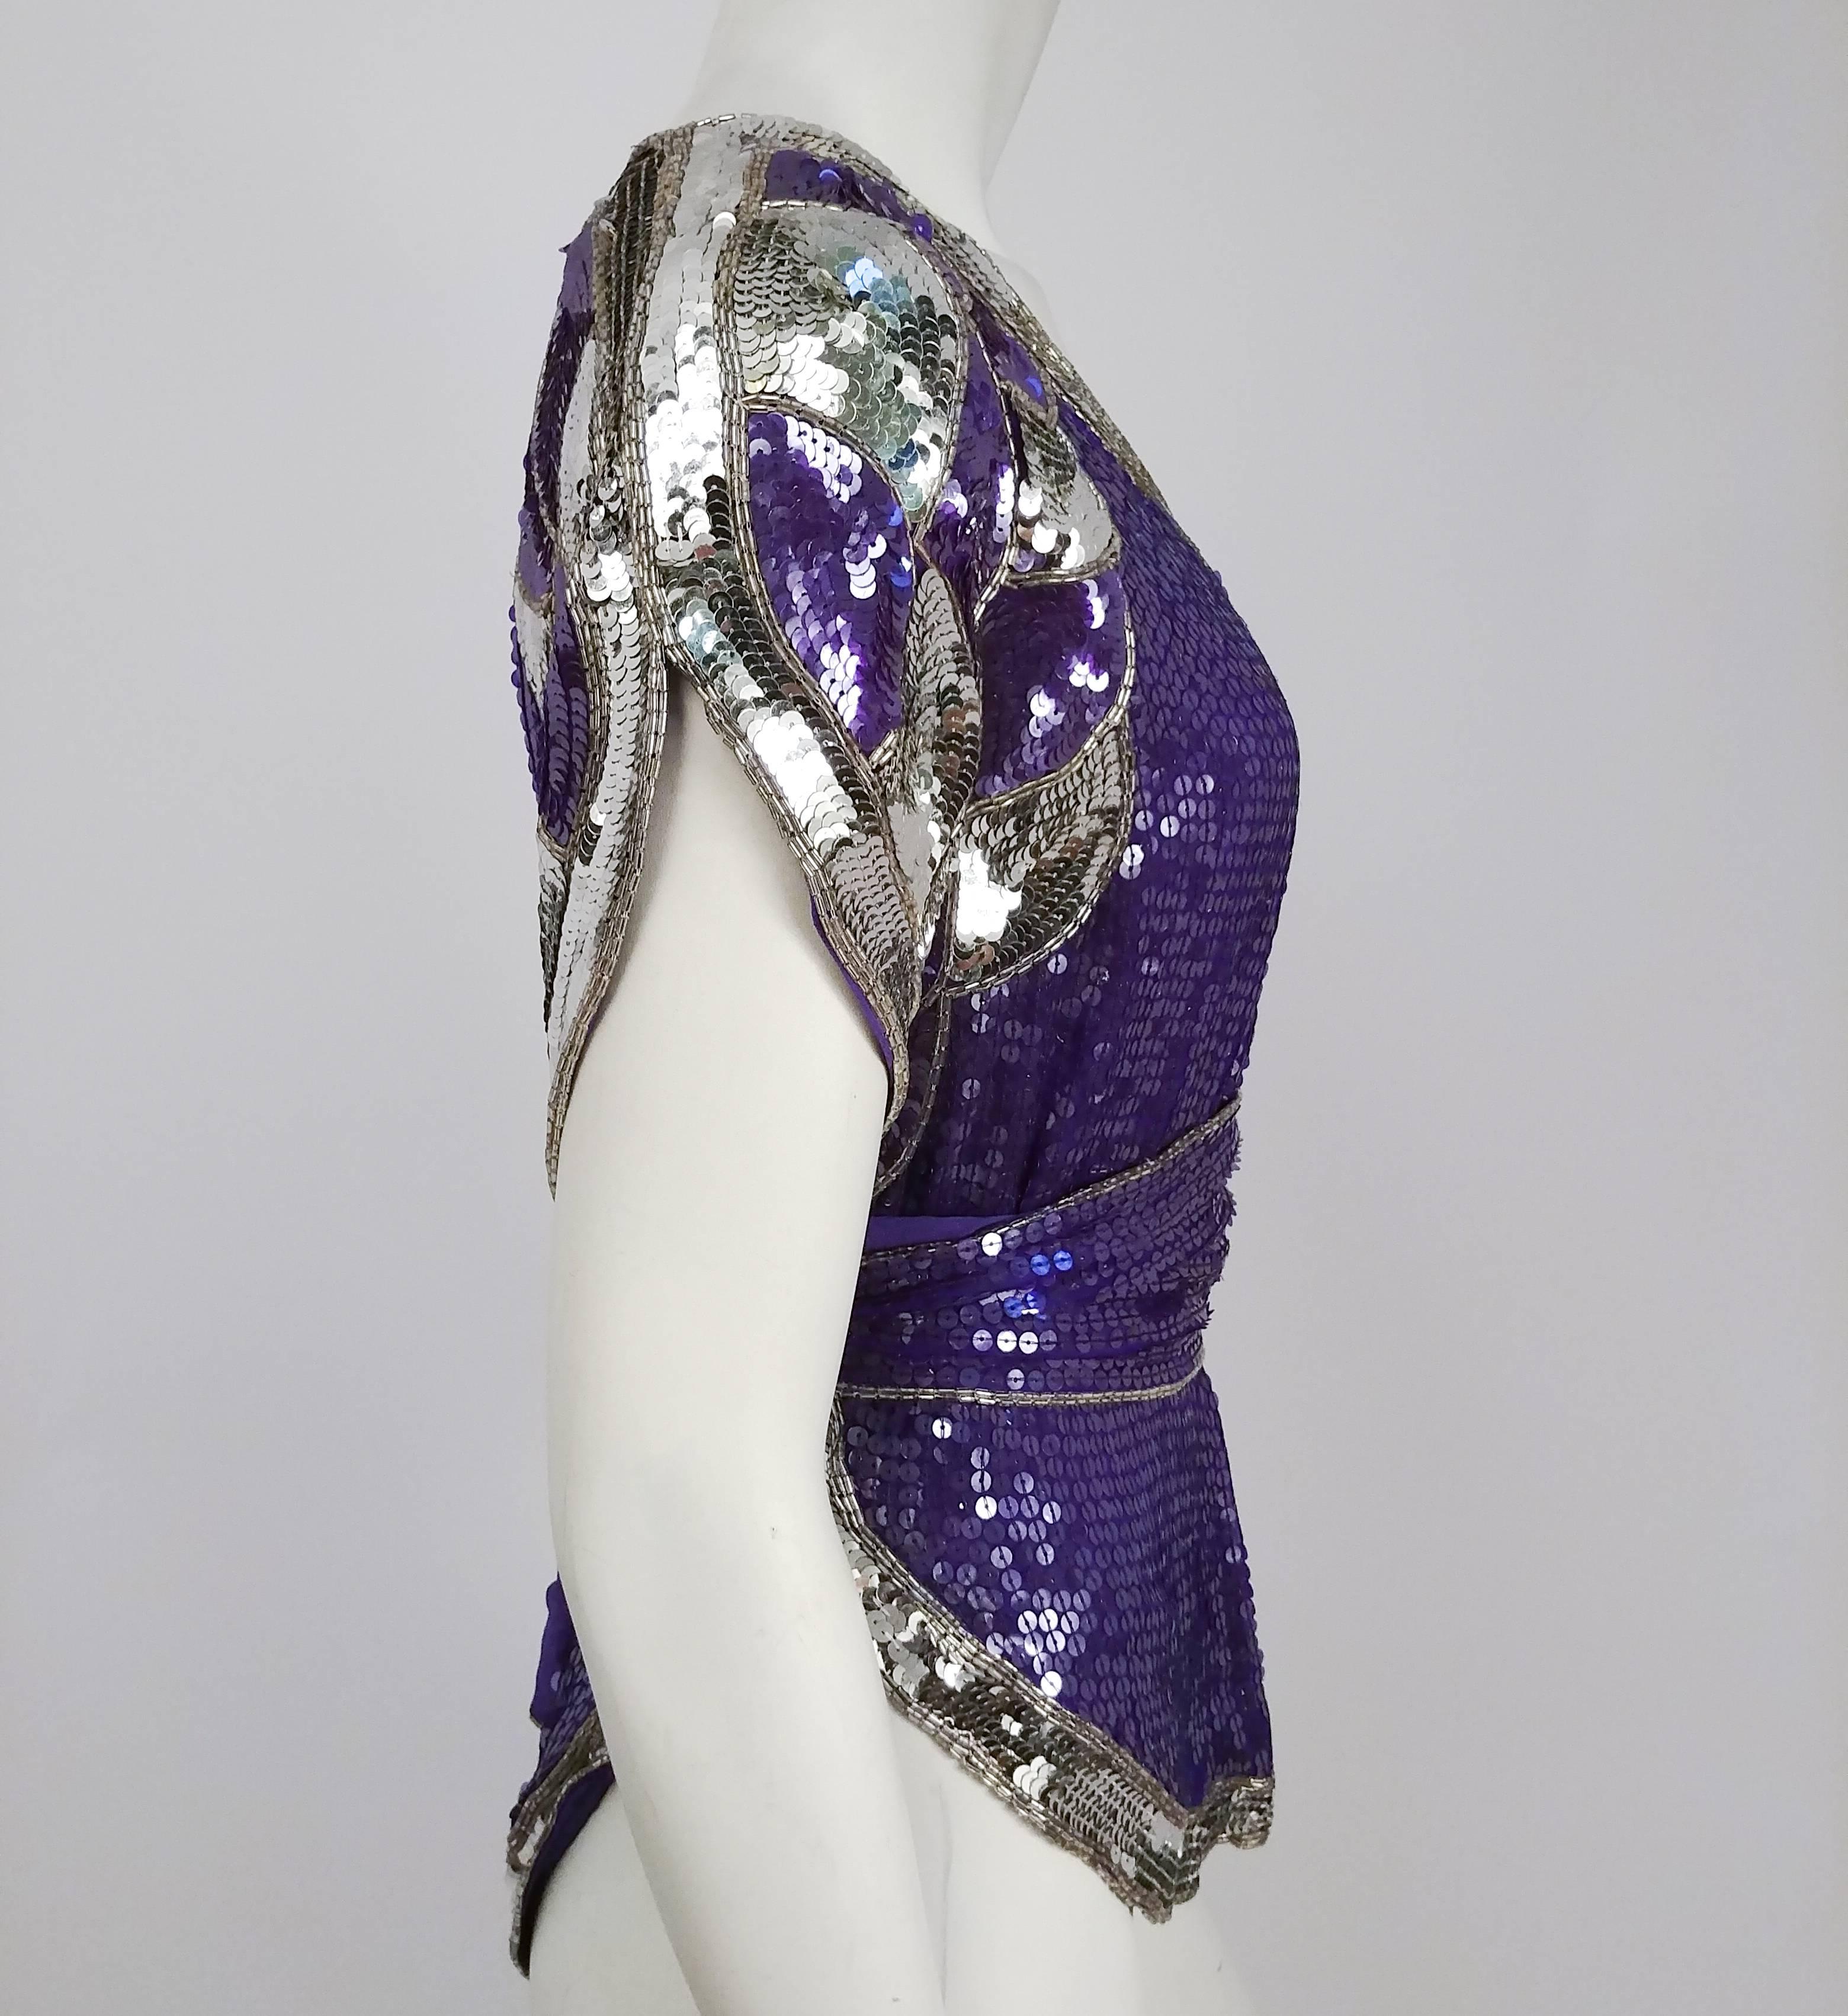 1980s Judith Ann Purple Sequin Top w/ Sash. Purple & silver sequins on silk base. Loose dolman top, can be cinched with matching sash. 